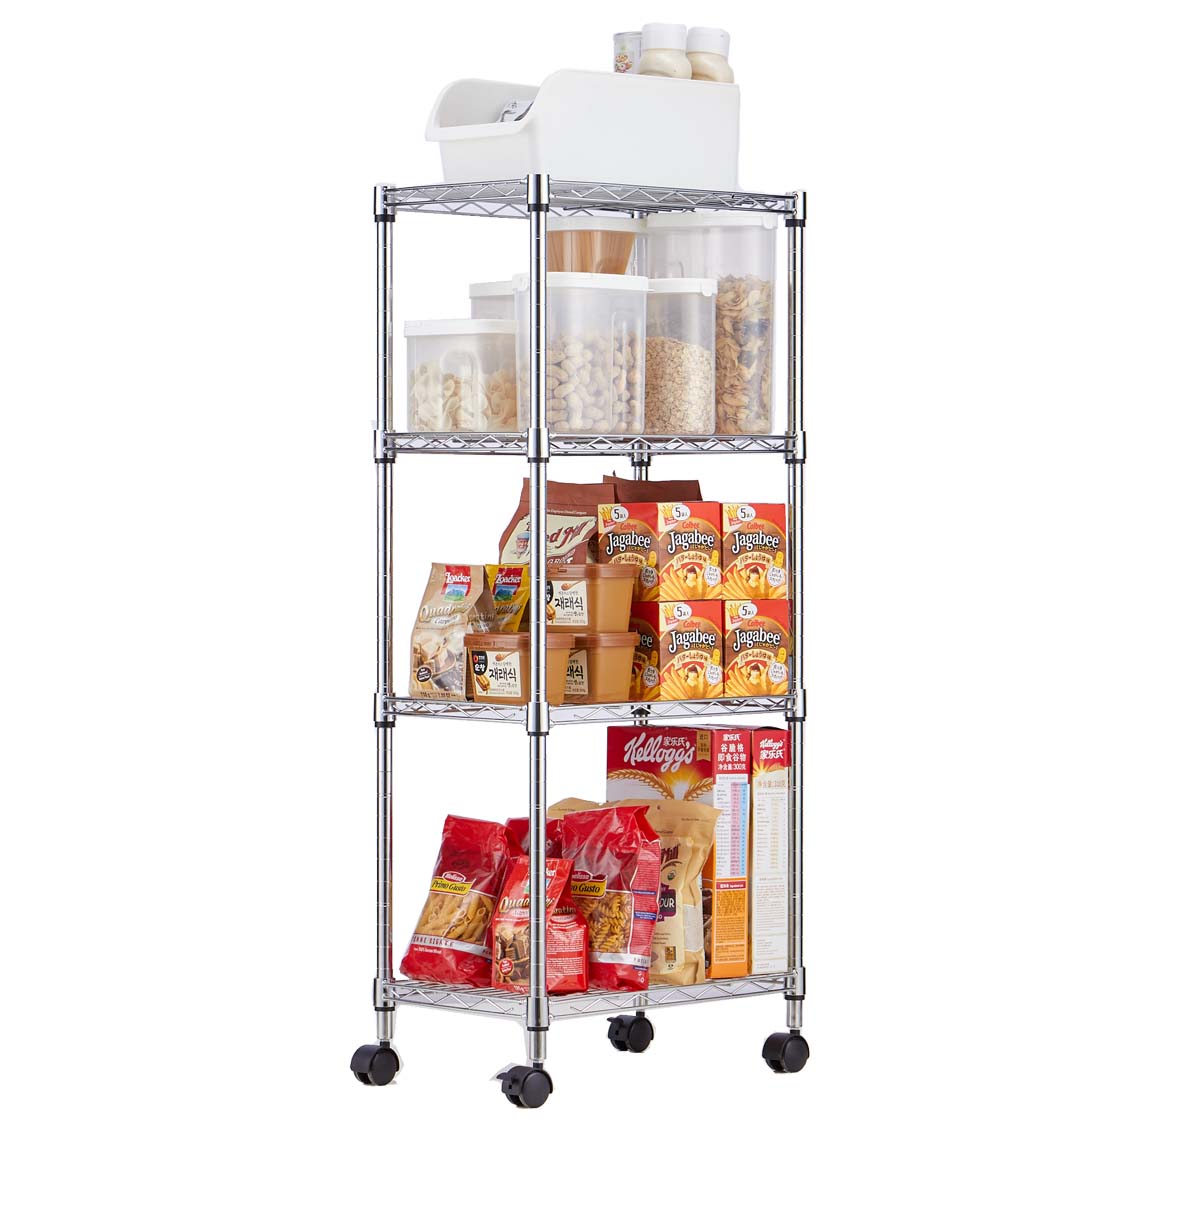 4-Tier Wire Chrome Shelving Unit for kitchen / Wire Shelving Unit With Wheels / Steel Wire Rack Shop